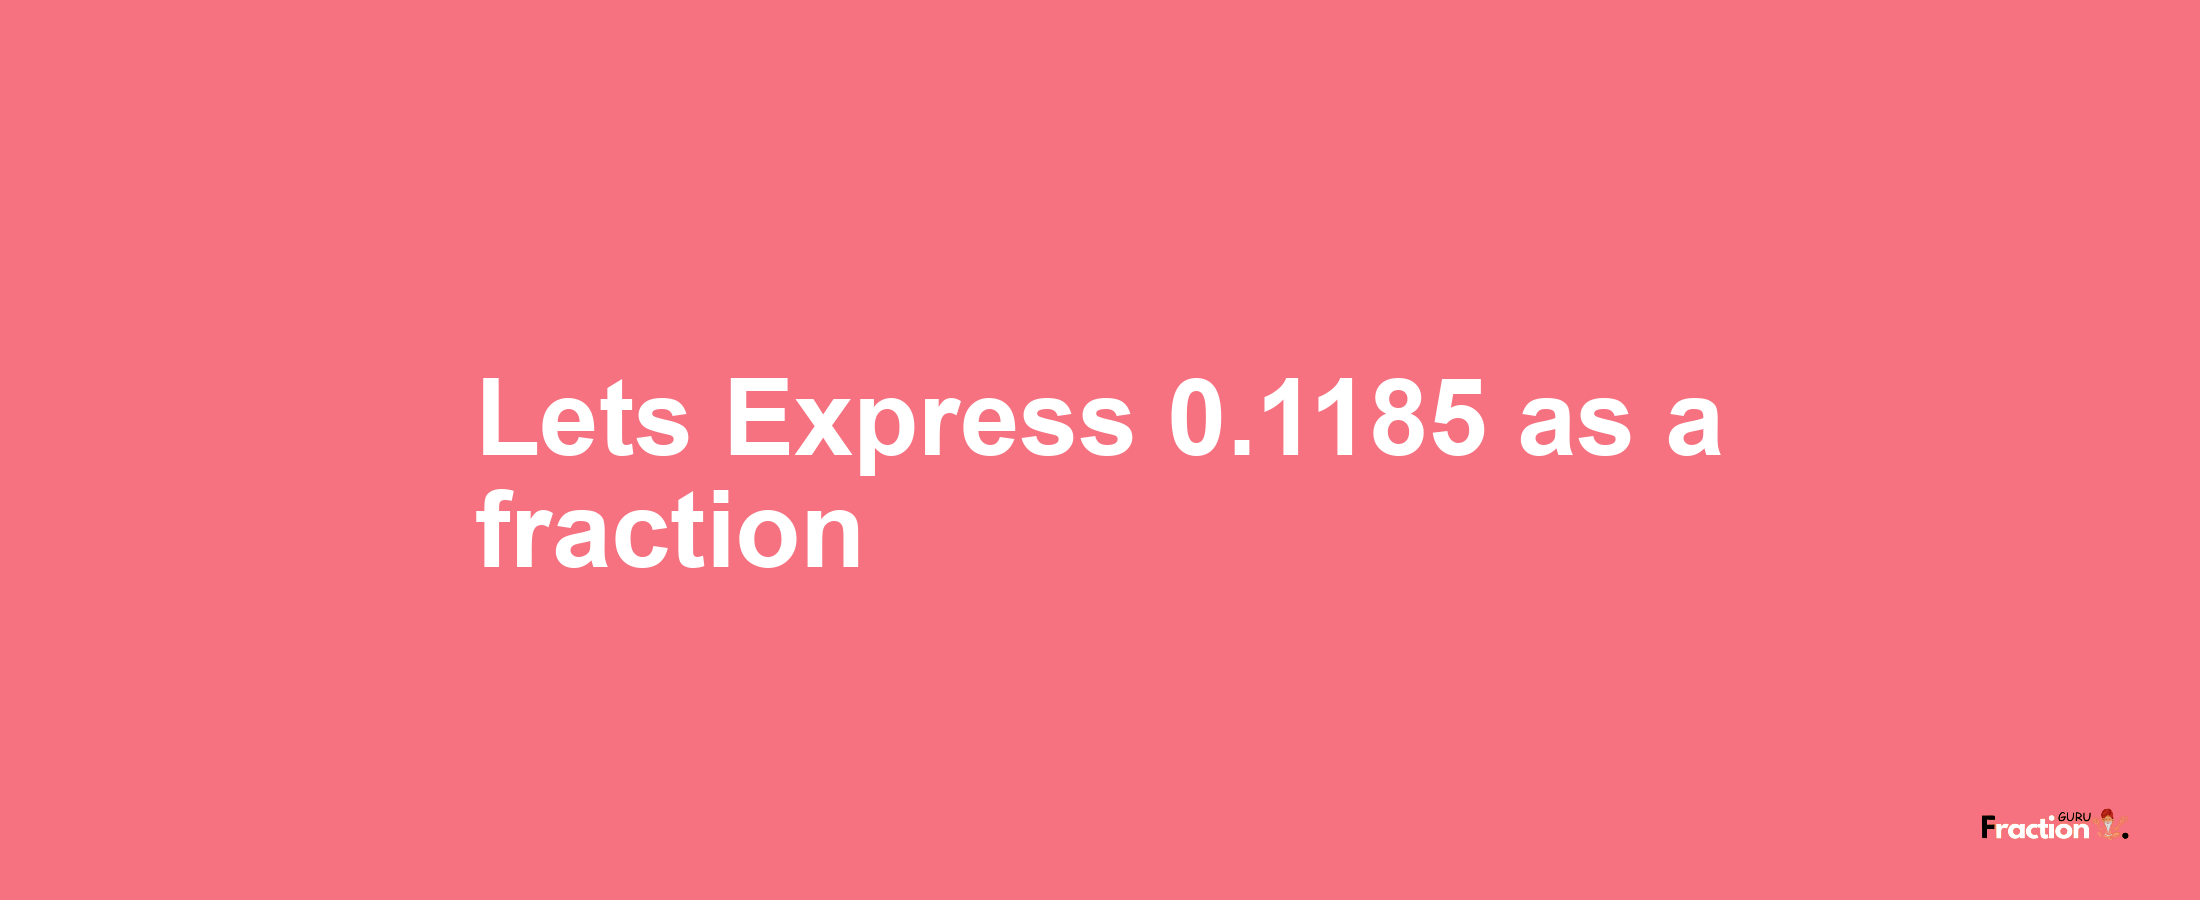 Lets Express 0.1185 as afraction